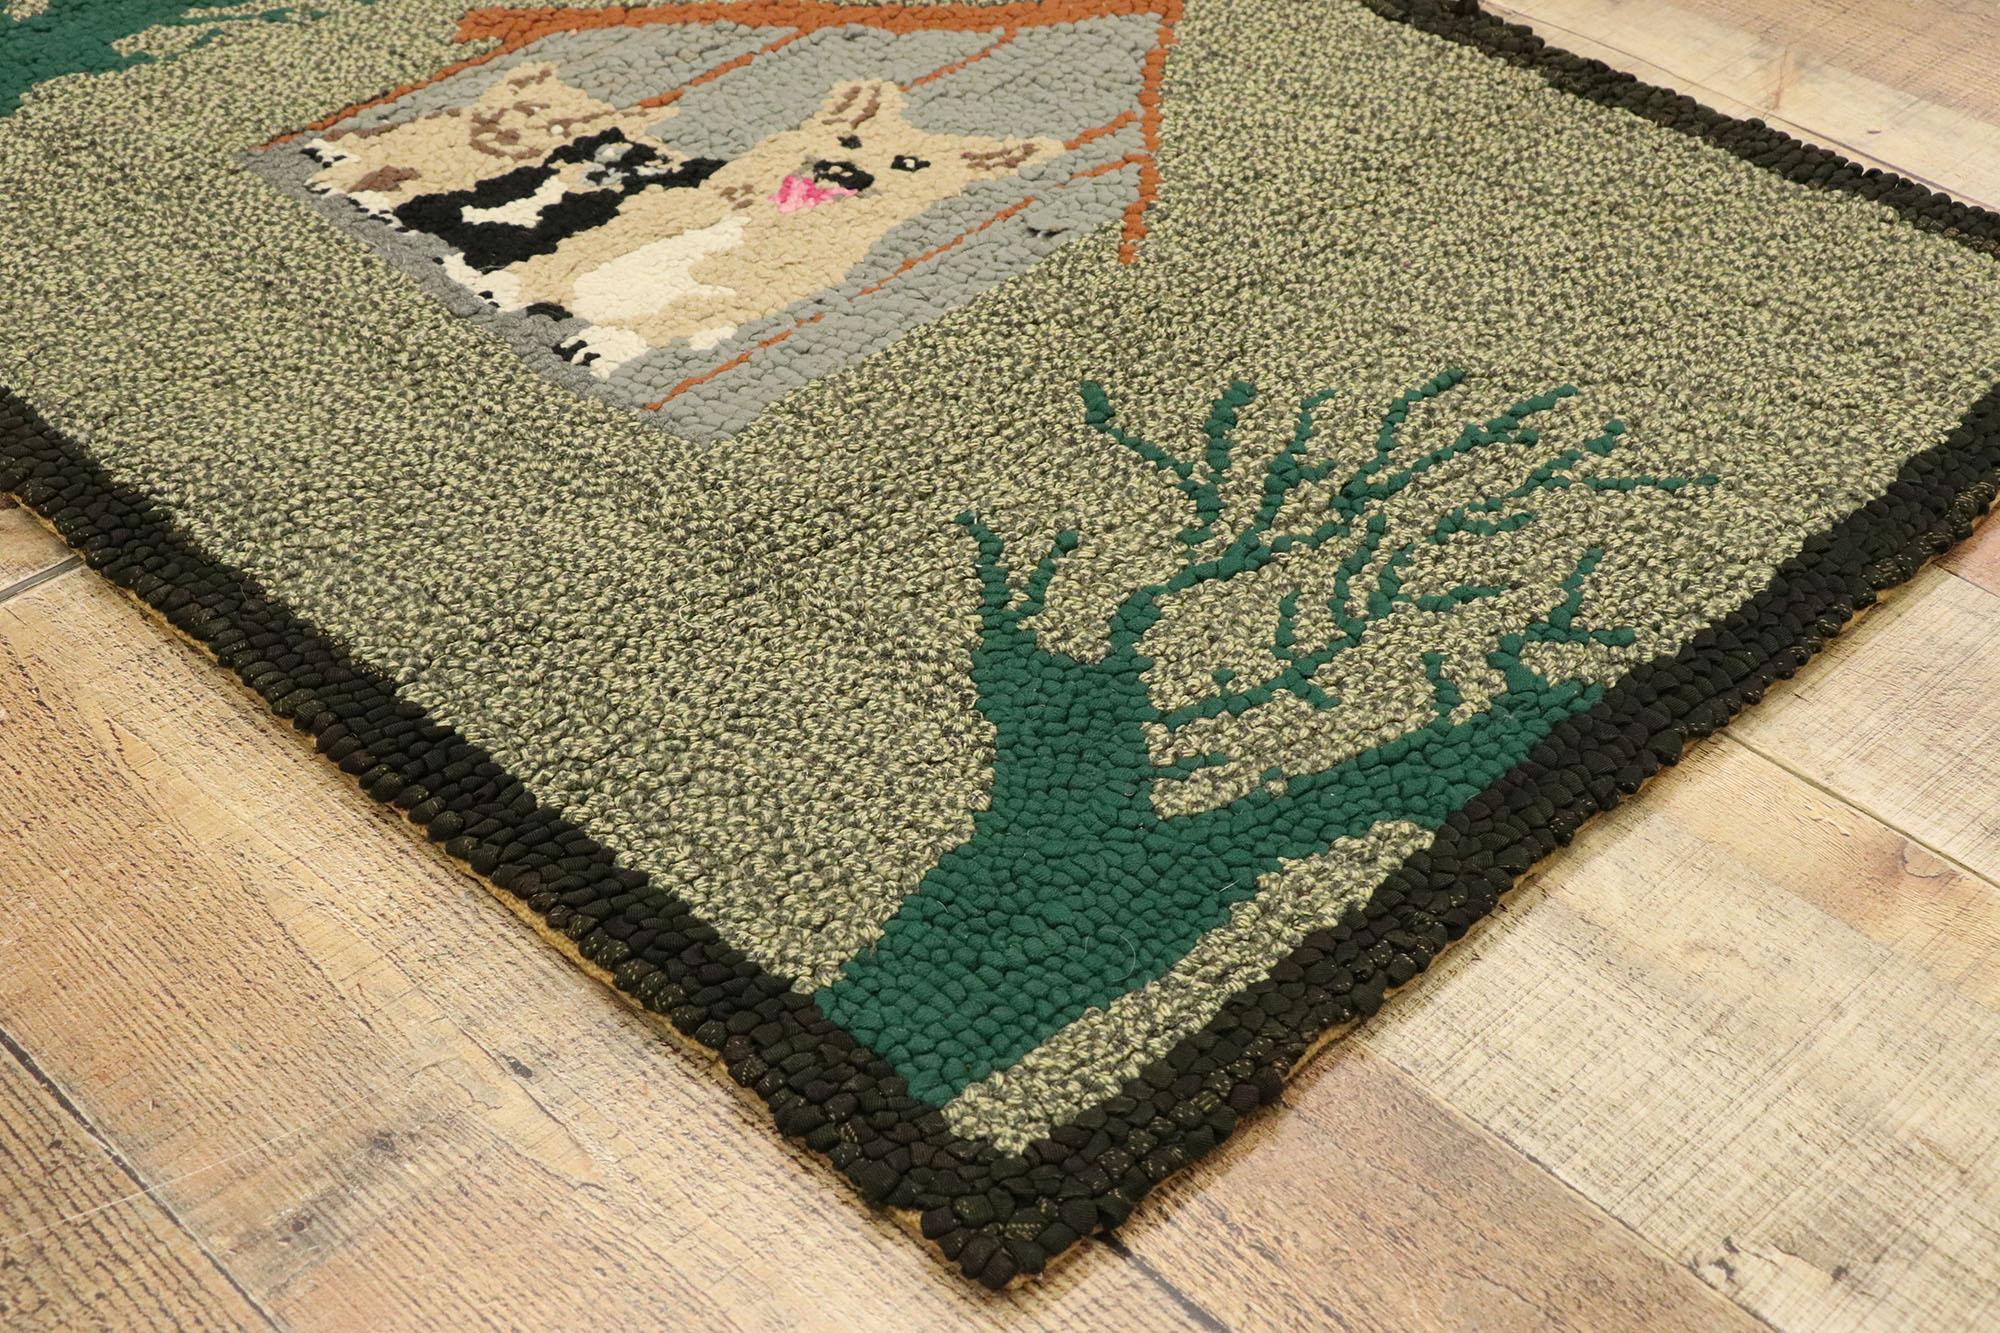 20th Century Vintage American Hooked Rug with Country Cottage Style, Dog Pictorial Tapestry